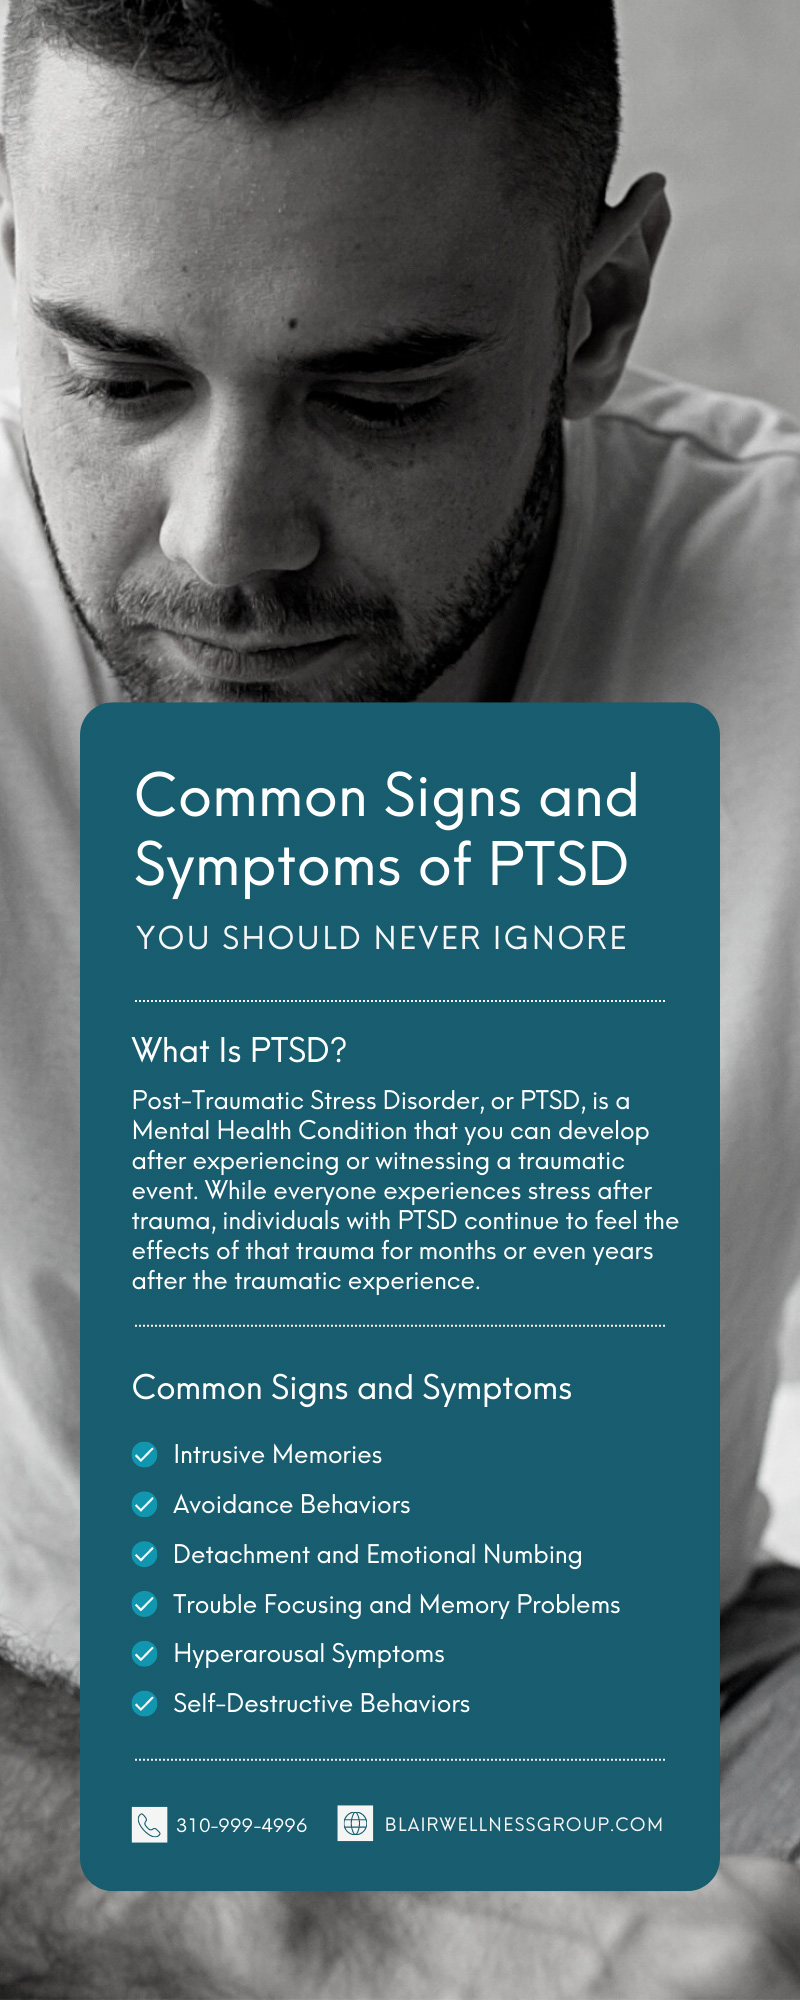 Common Signs and Symptoms of PTSD You Should Never Ignore